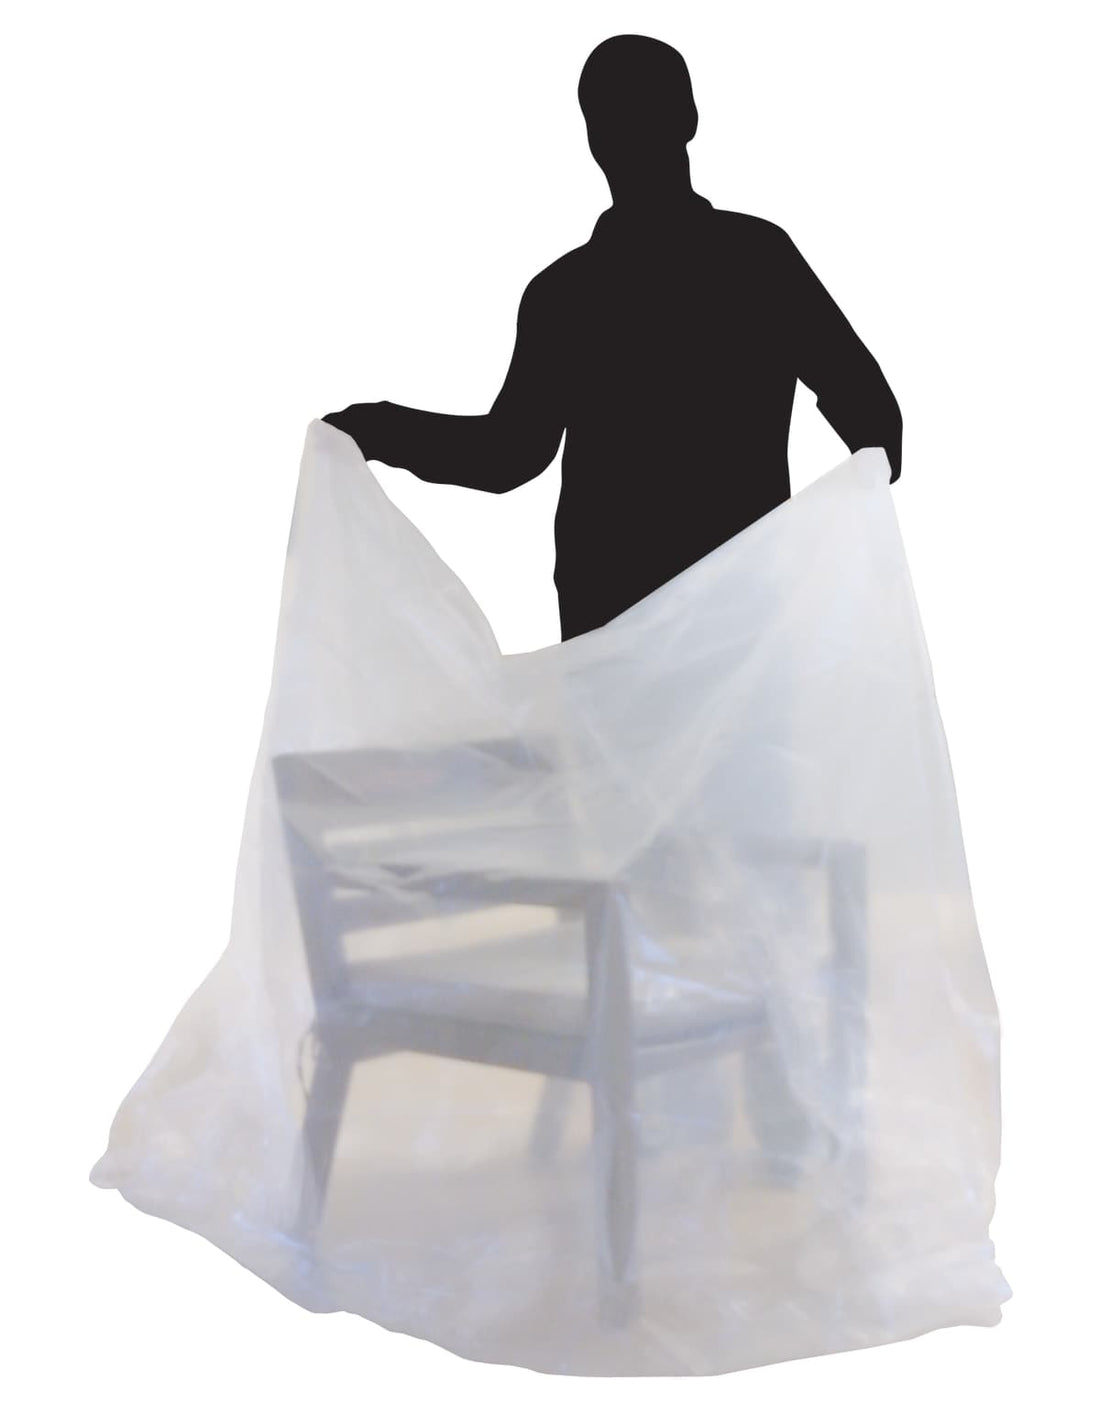 POLYPROPYLENE TRANSPARENT POLYPROPYLENE PROTECTION COVER FOR CHAIR OR CHAIR L130xD110CM - best price from Maltashopper.com BR410002396